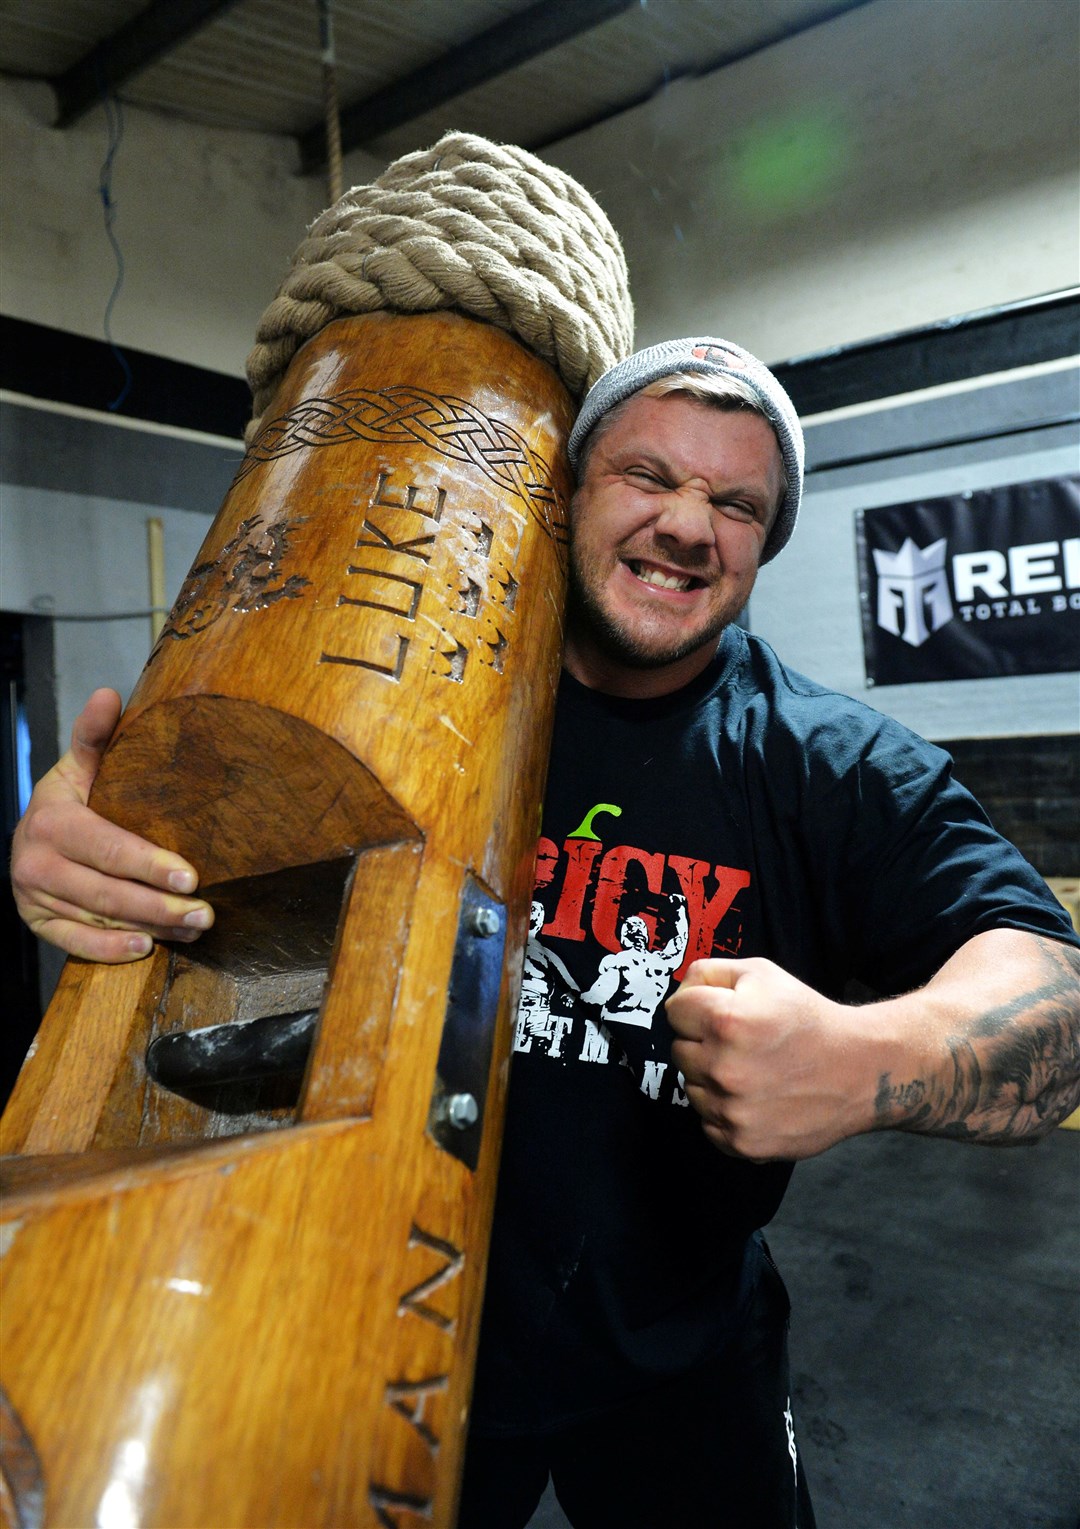 Luke Stoltman, here in strongman mode with a mighty wooden log, is thrilled with the safe arrival of his son. Picture: Callum Mackay